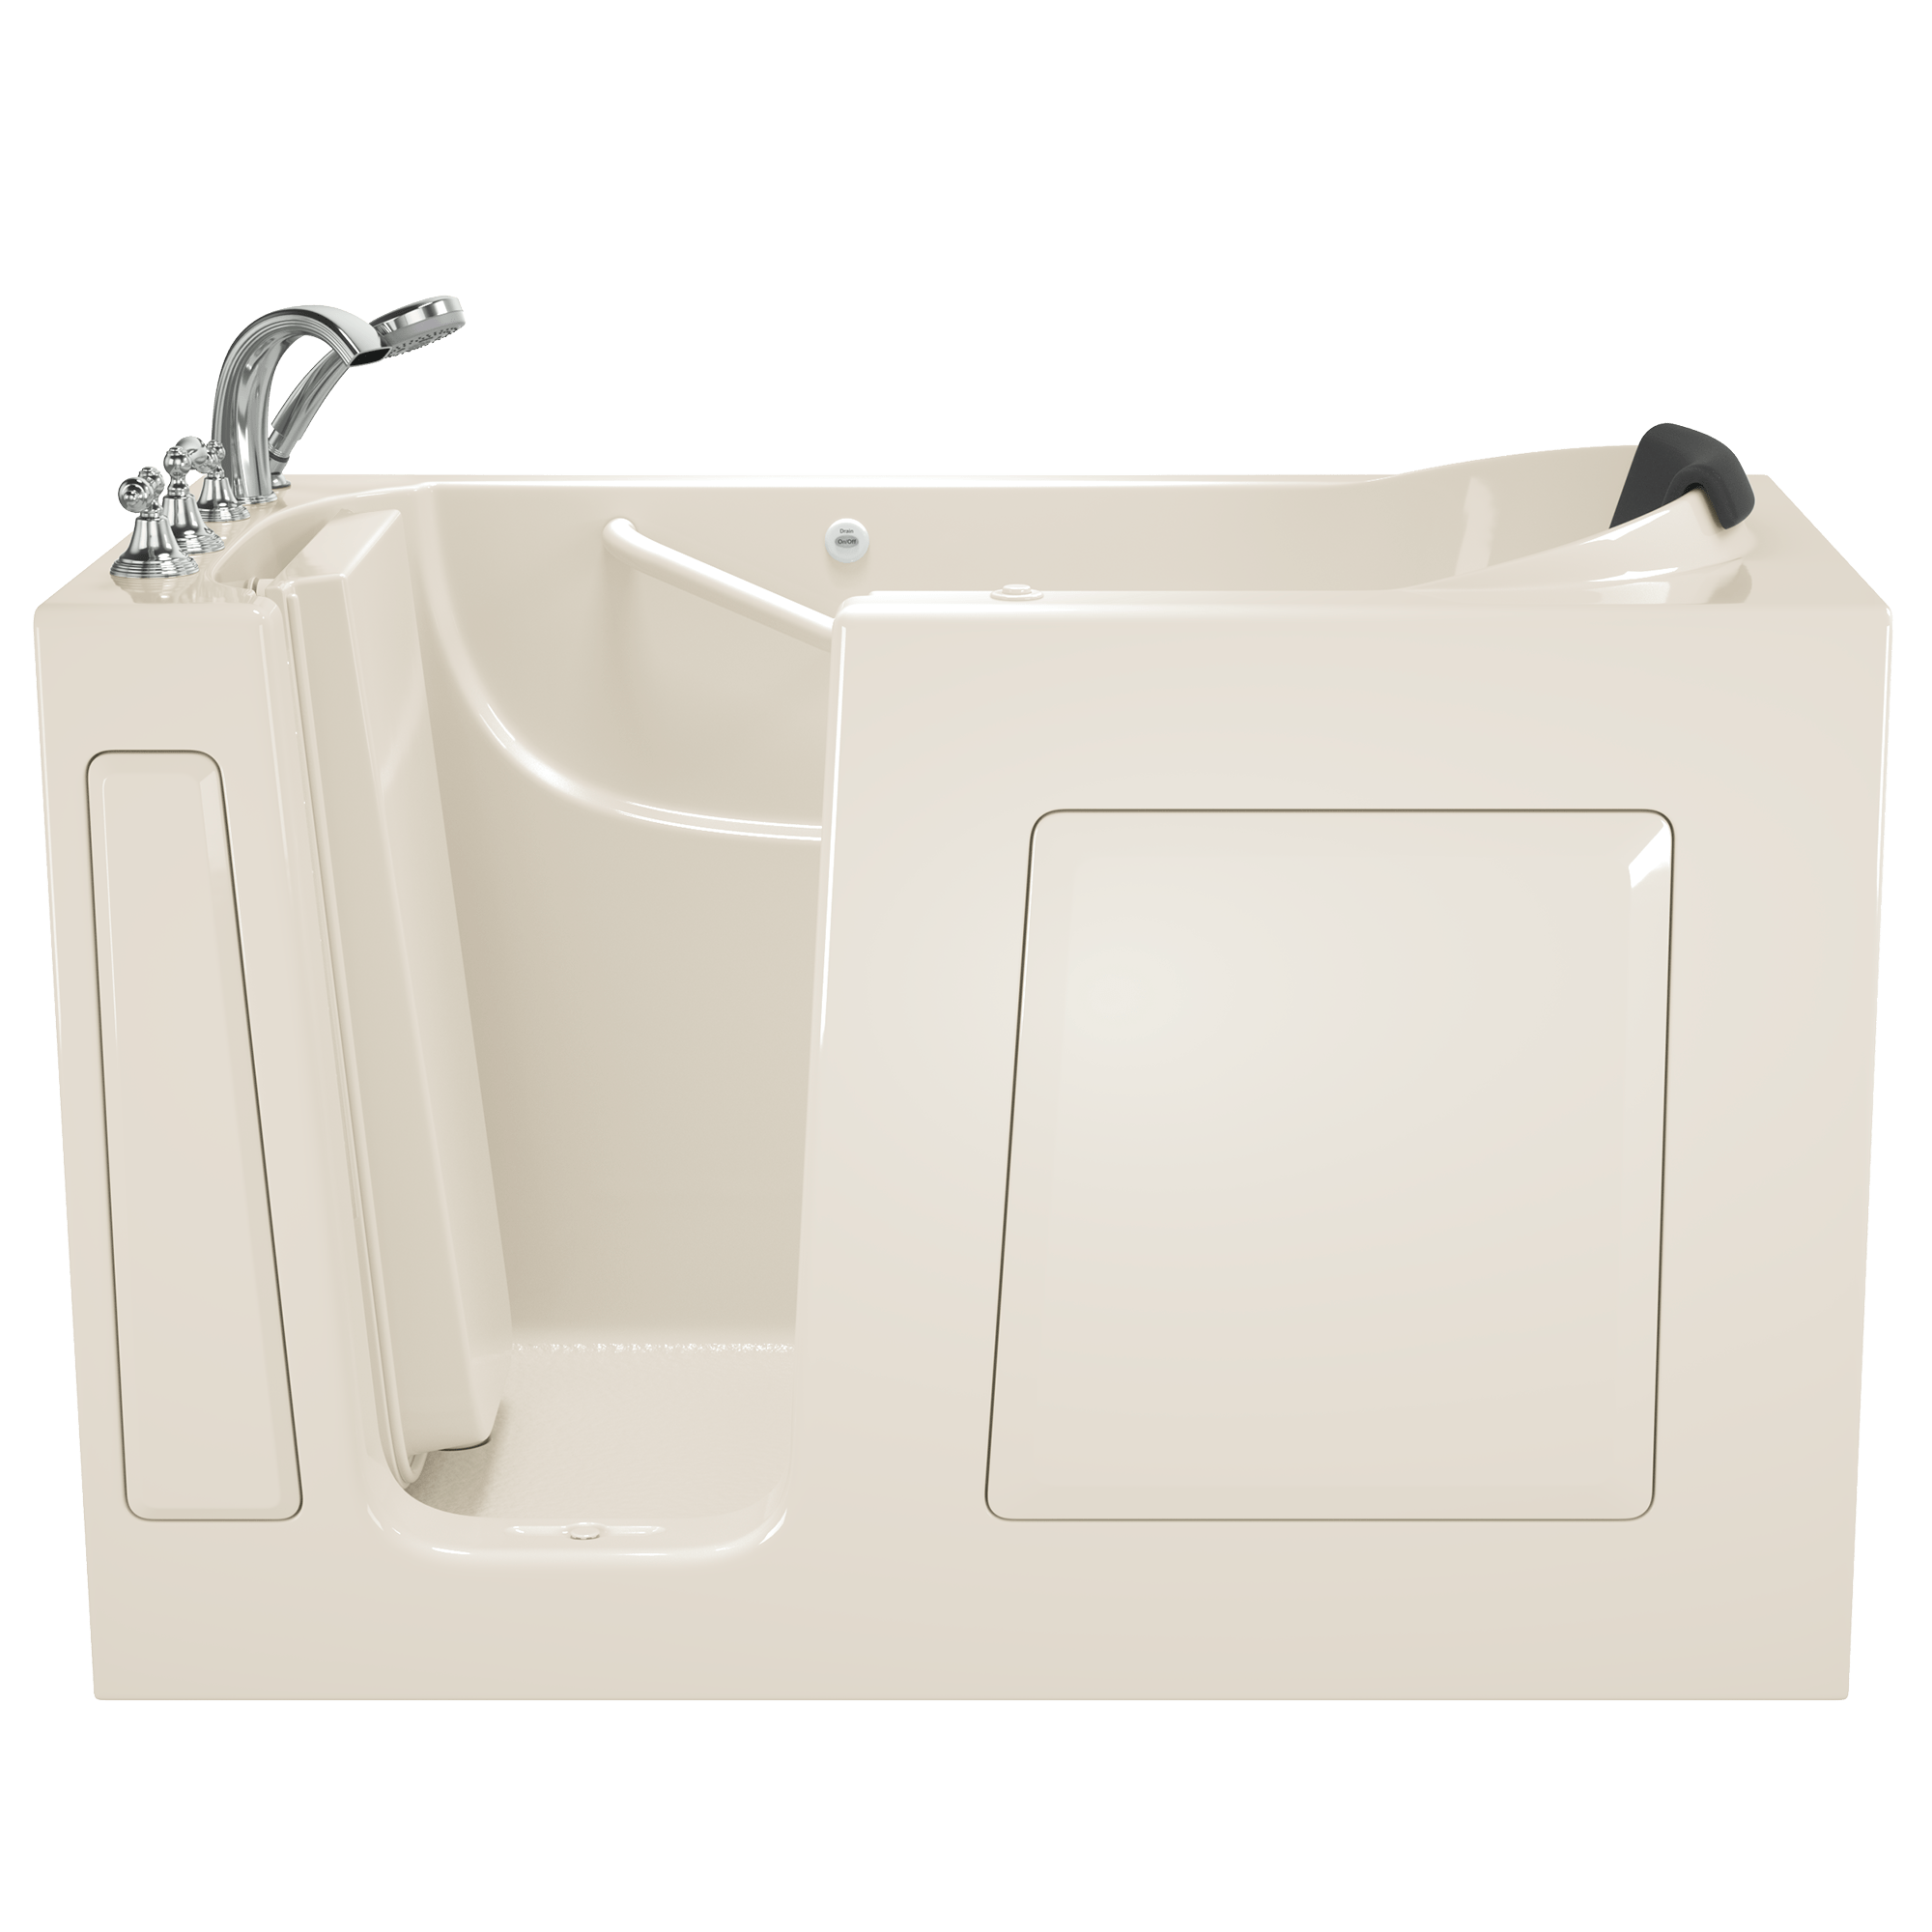 Gelcoat Premium Series 30 x 60  Inch Walk in Tub With Air Spa System   Left Hand Drain With Faucet WIB LINEN